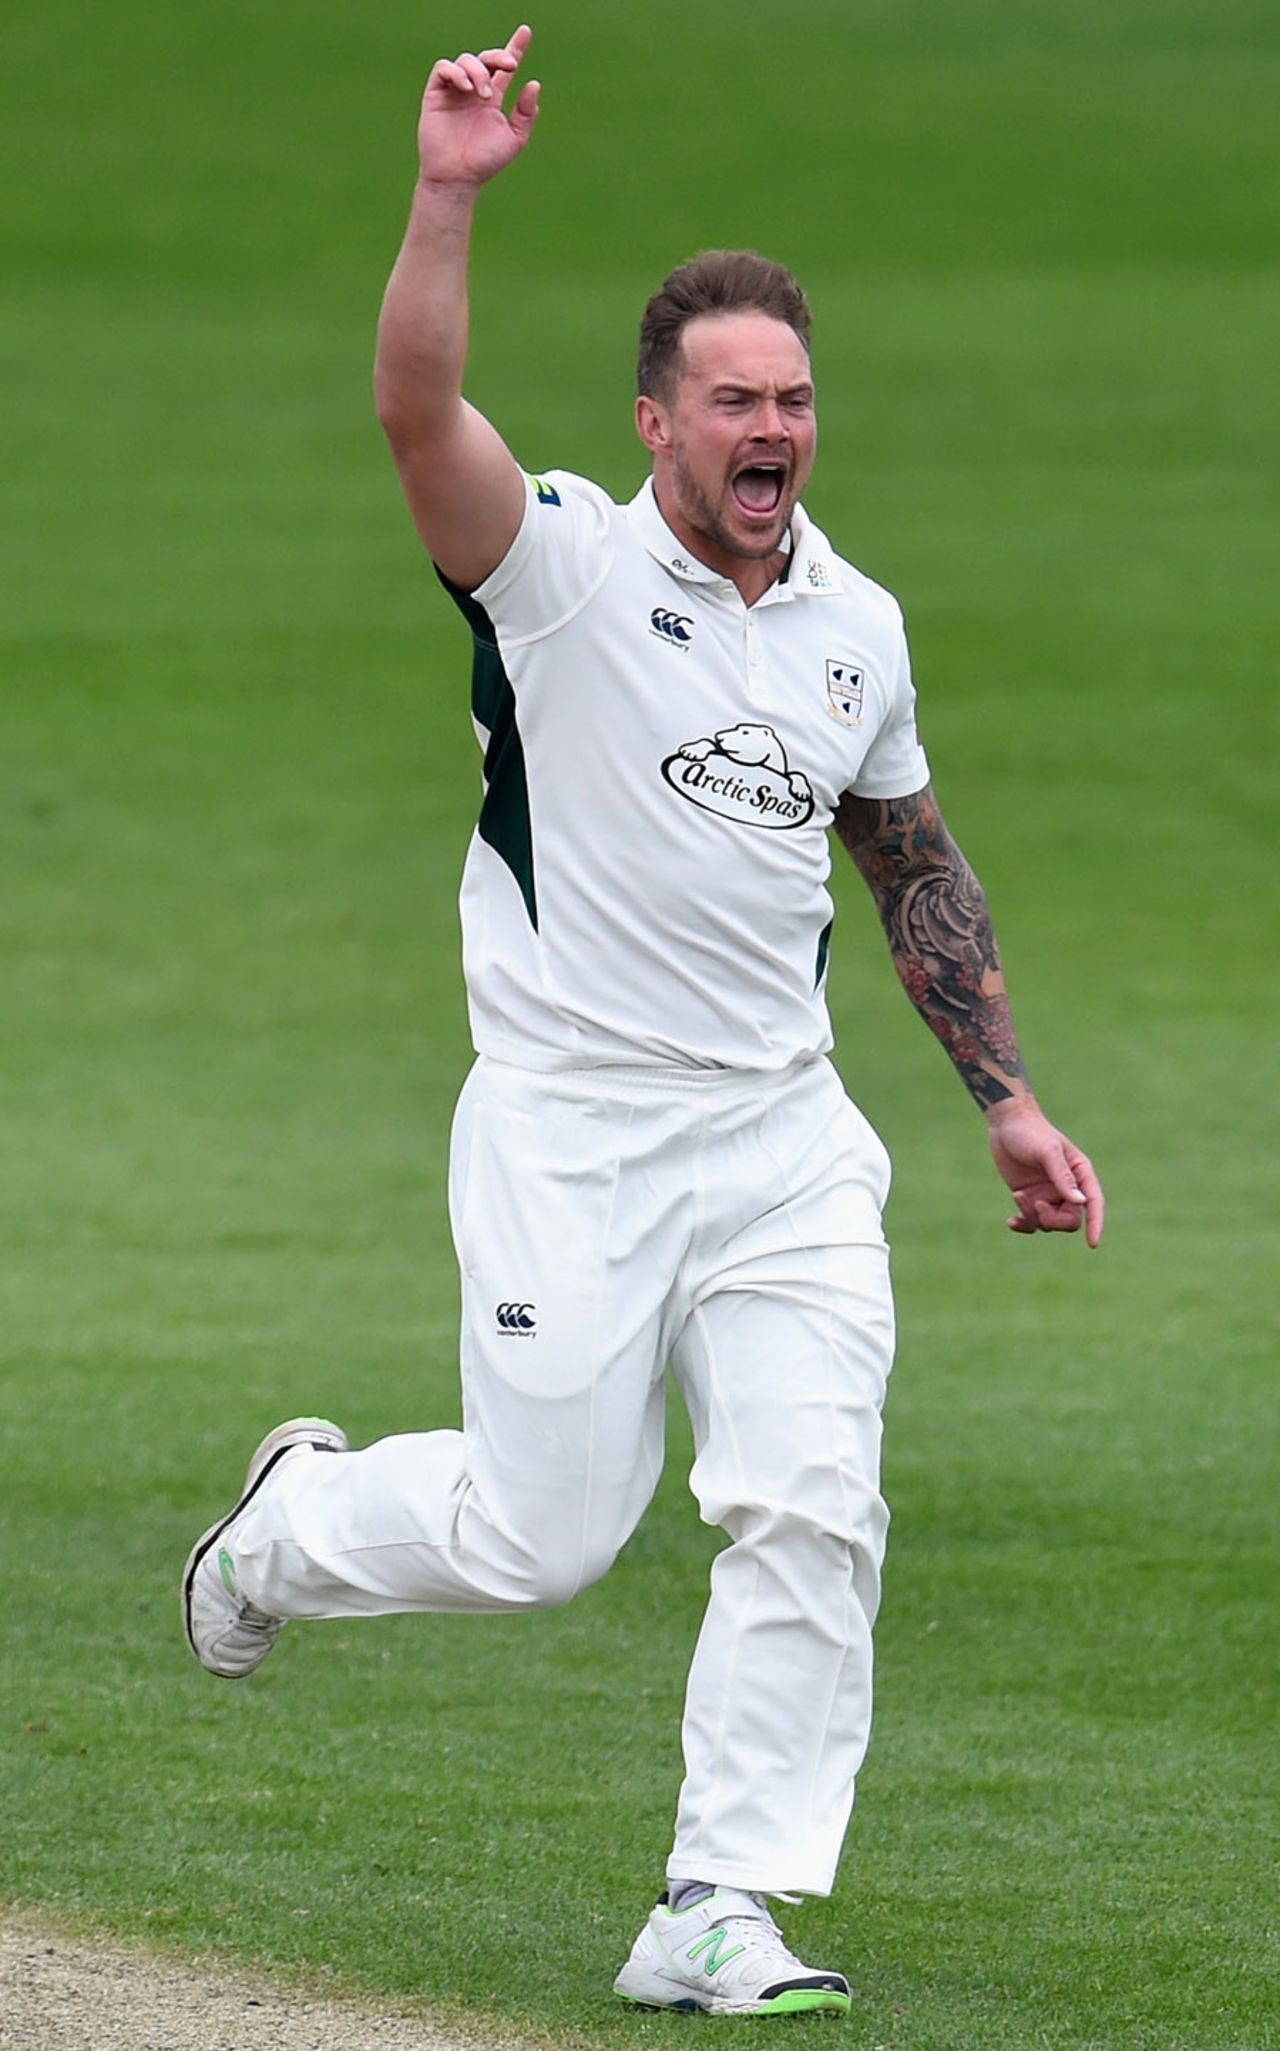 Gareth Andrew picked up the prize wicket of Cheteshwar Pujara, Worcestershire v Yorkshire, County Championship Division One, New Road, 2nd day, April 13, 2015